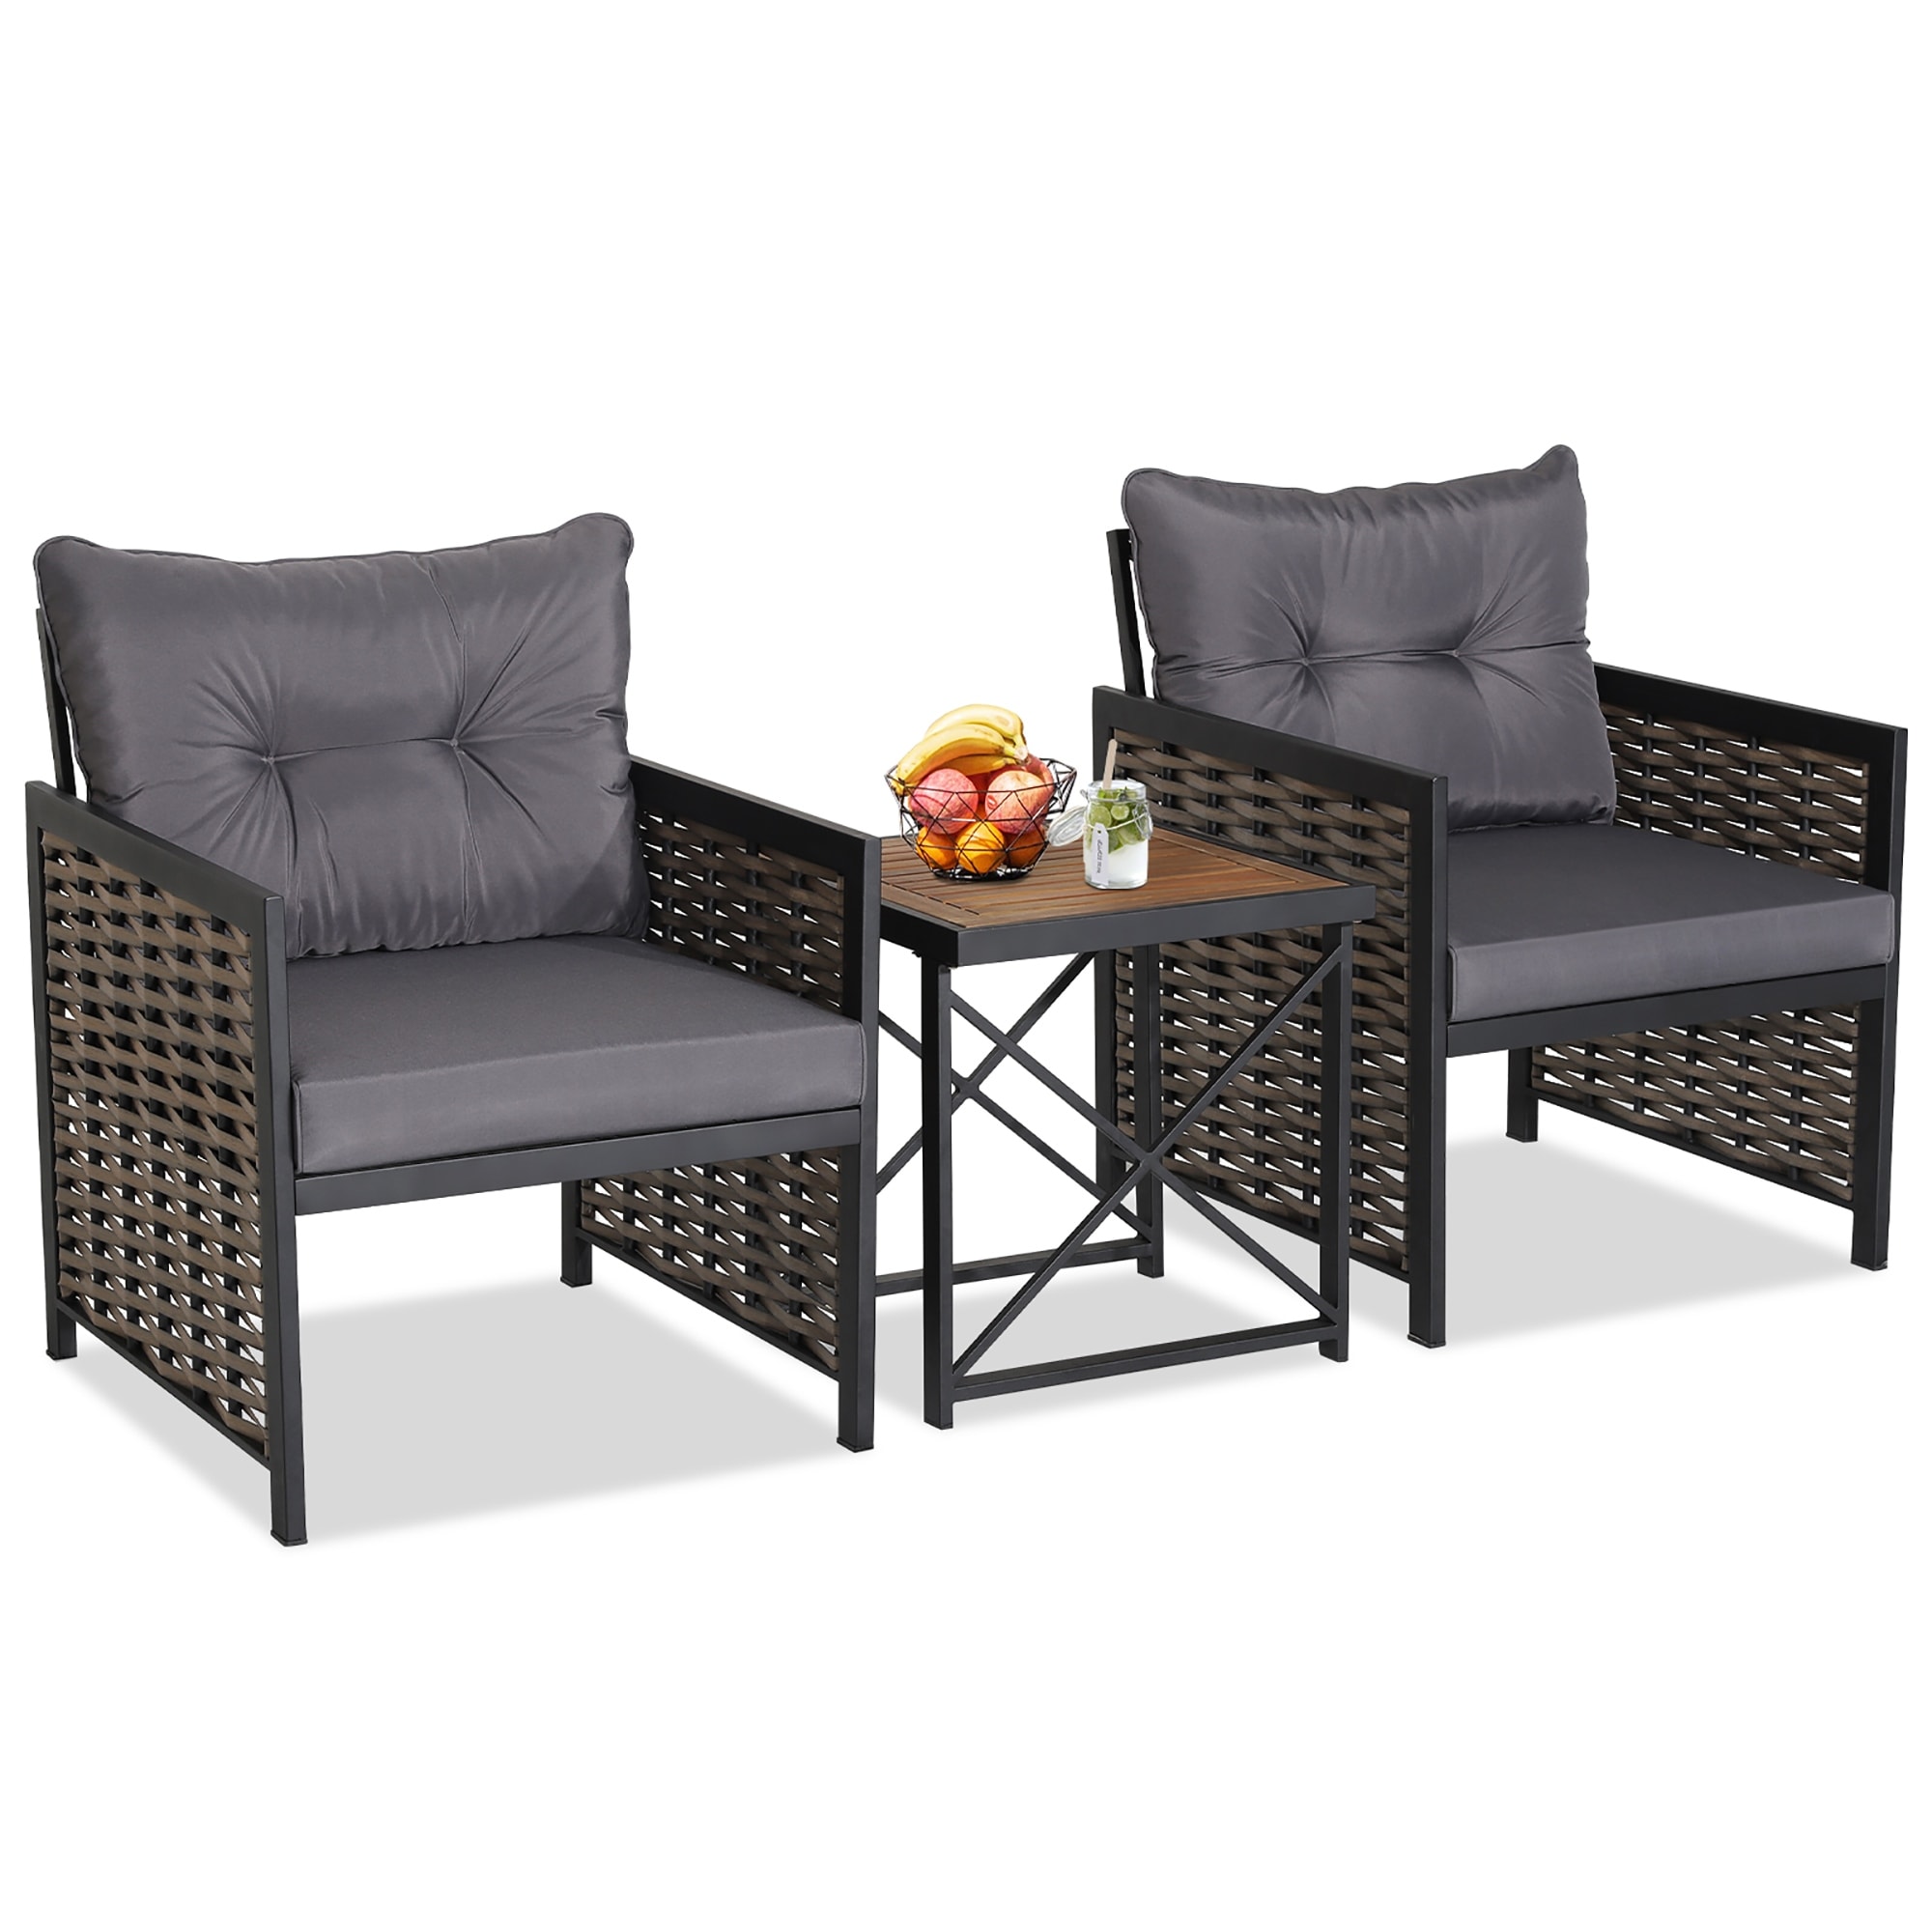 3 Pcs Patio Rattan Furniture Set Acacia Wood Coffee Table and 2 Chairs